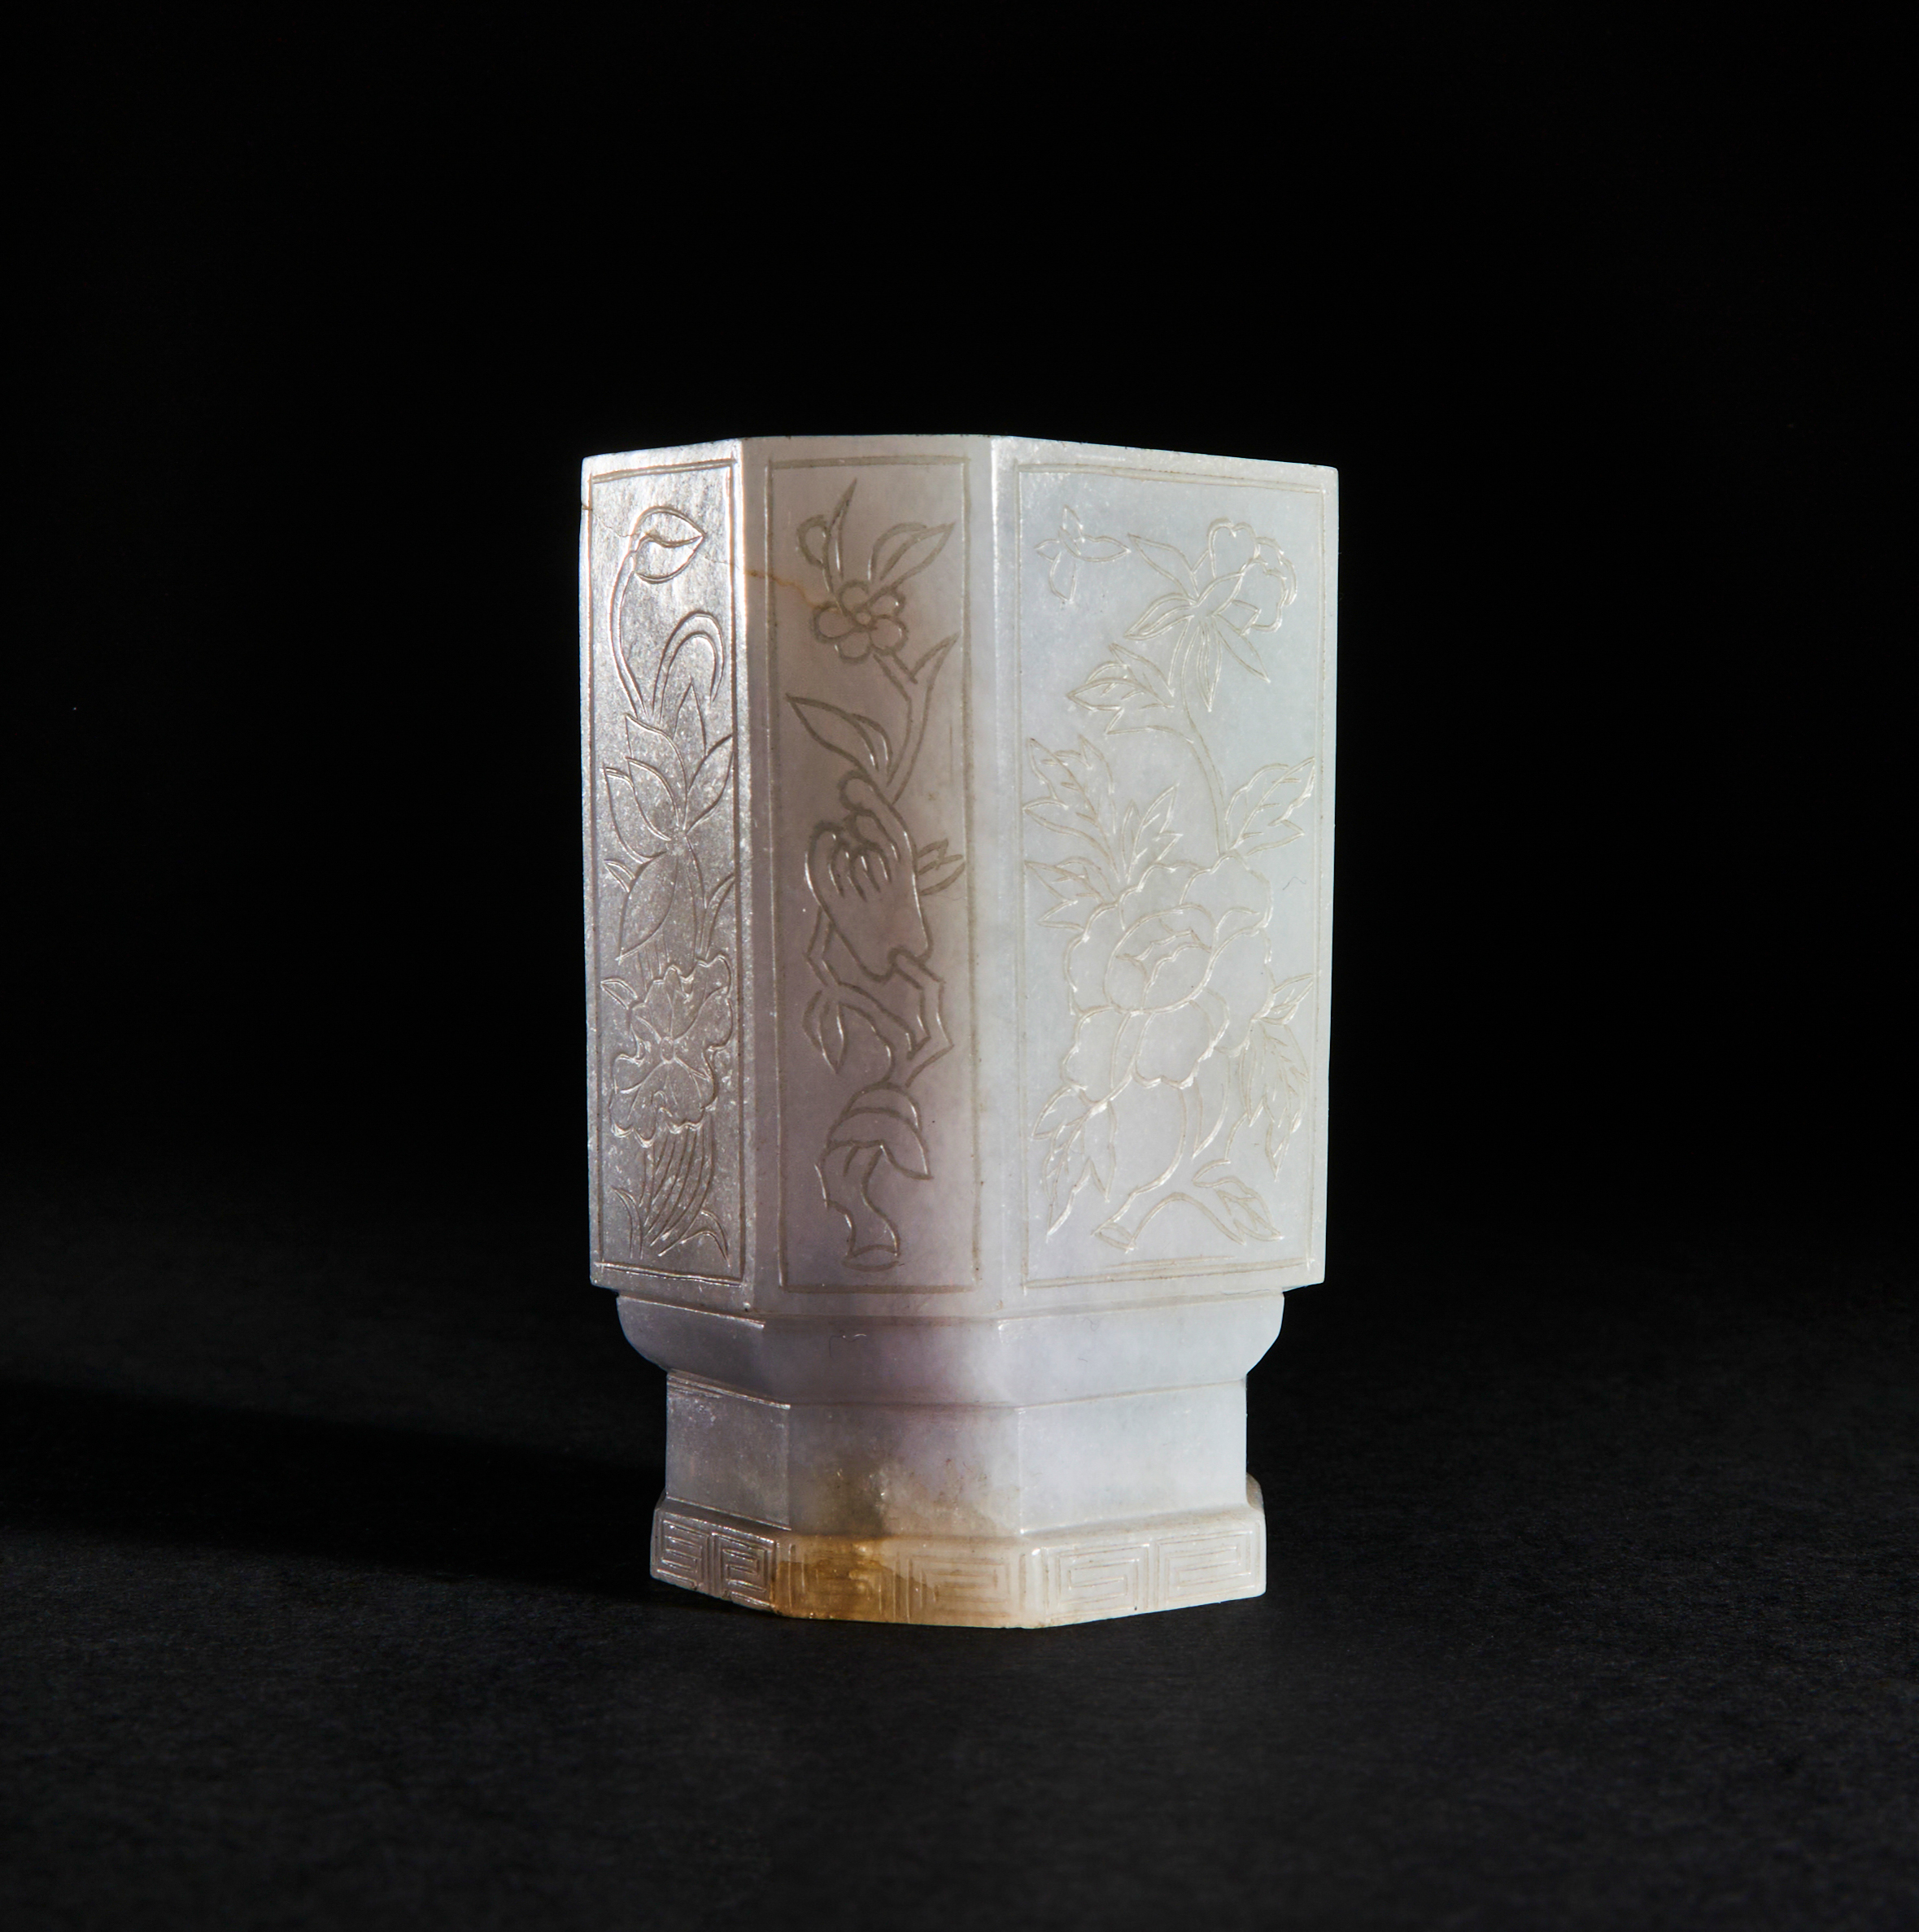 AN ENGRAVED FLORAL CHINESE WHITE JADE FOOTED CUP, QING DYNASTY (1644-1911) - Image 2 of 3